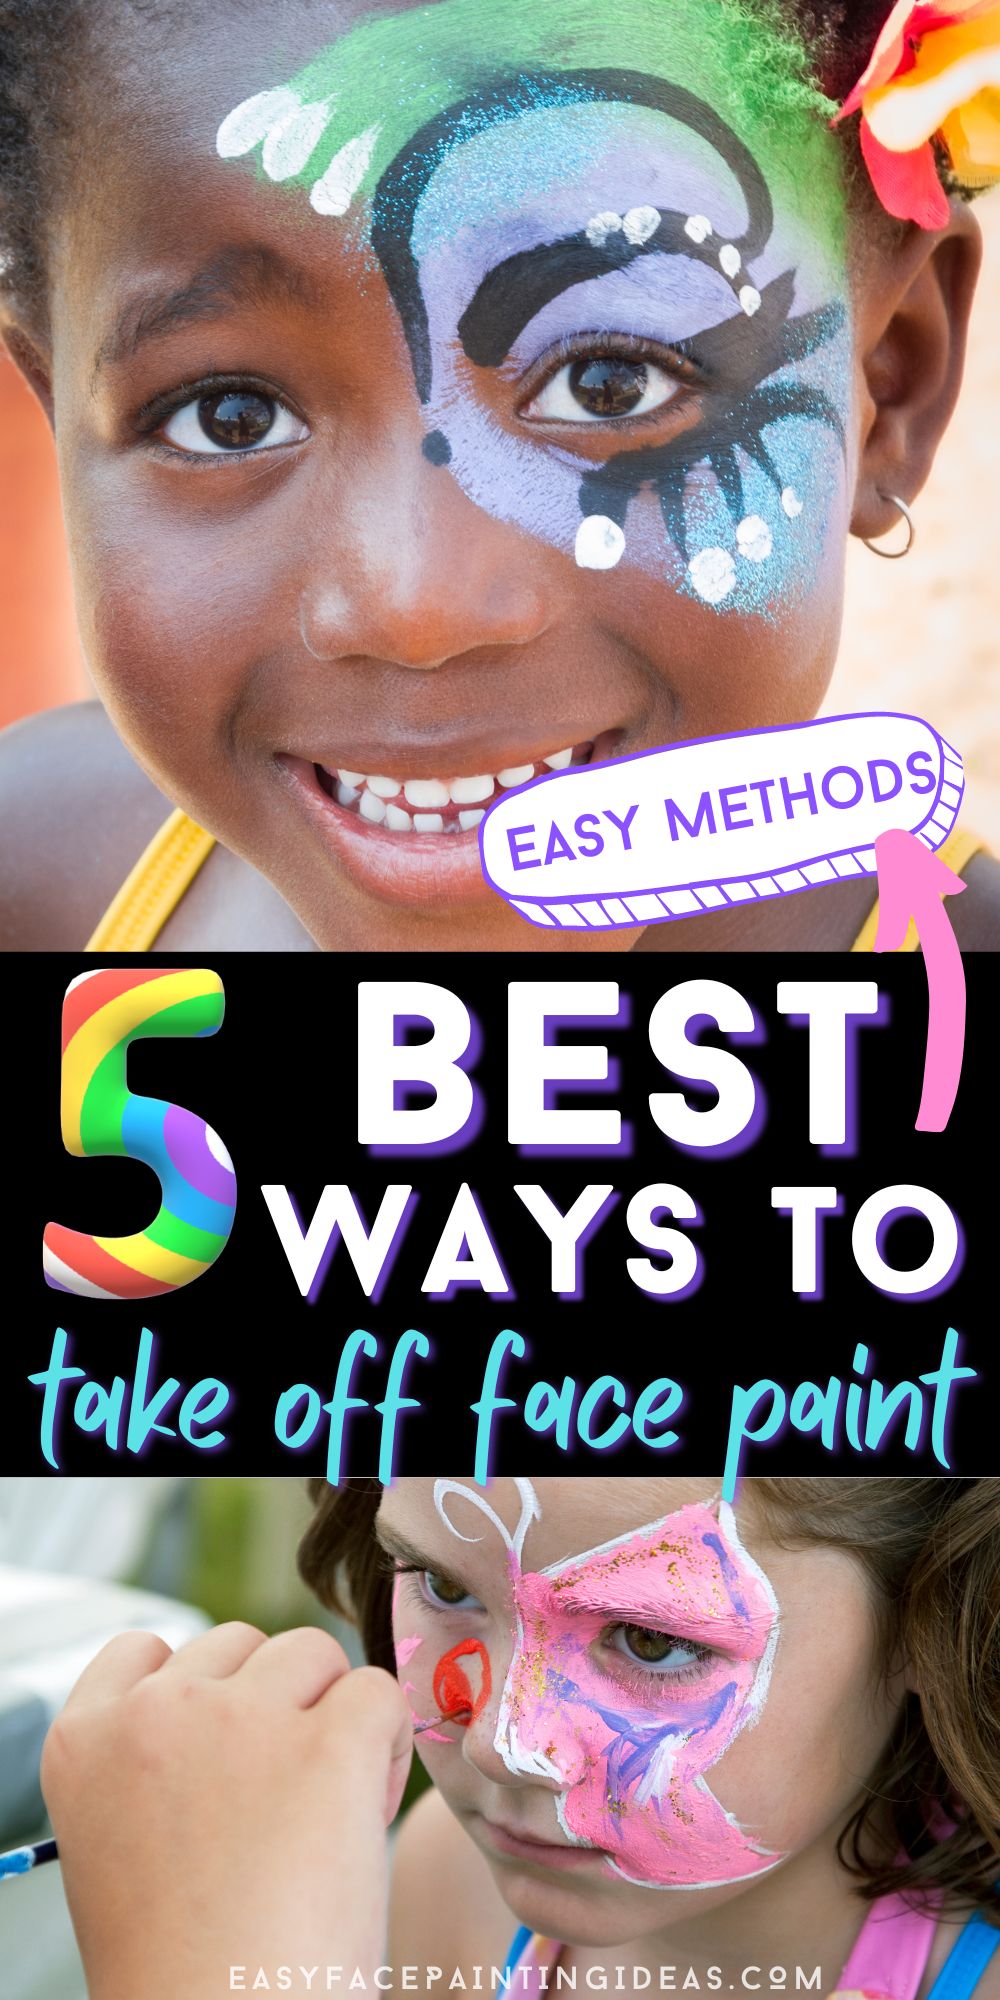 collage of two photos; one of a girl with her face painted with blue and green swirl, and another girl with her face painted with a pink butterfly. An overlay reads, "5 Best Ways to take off face paint"